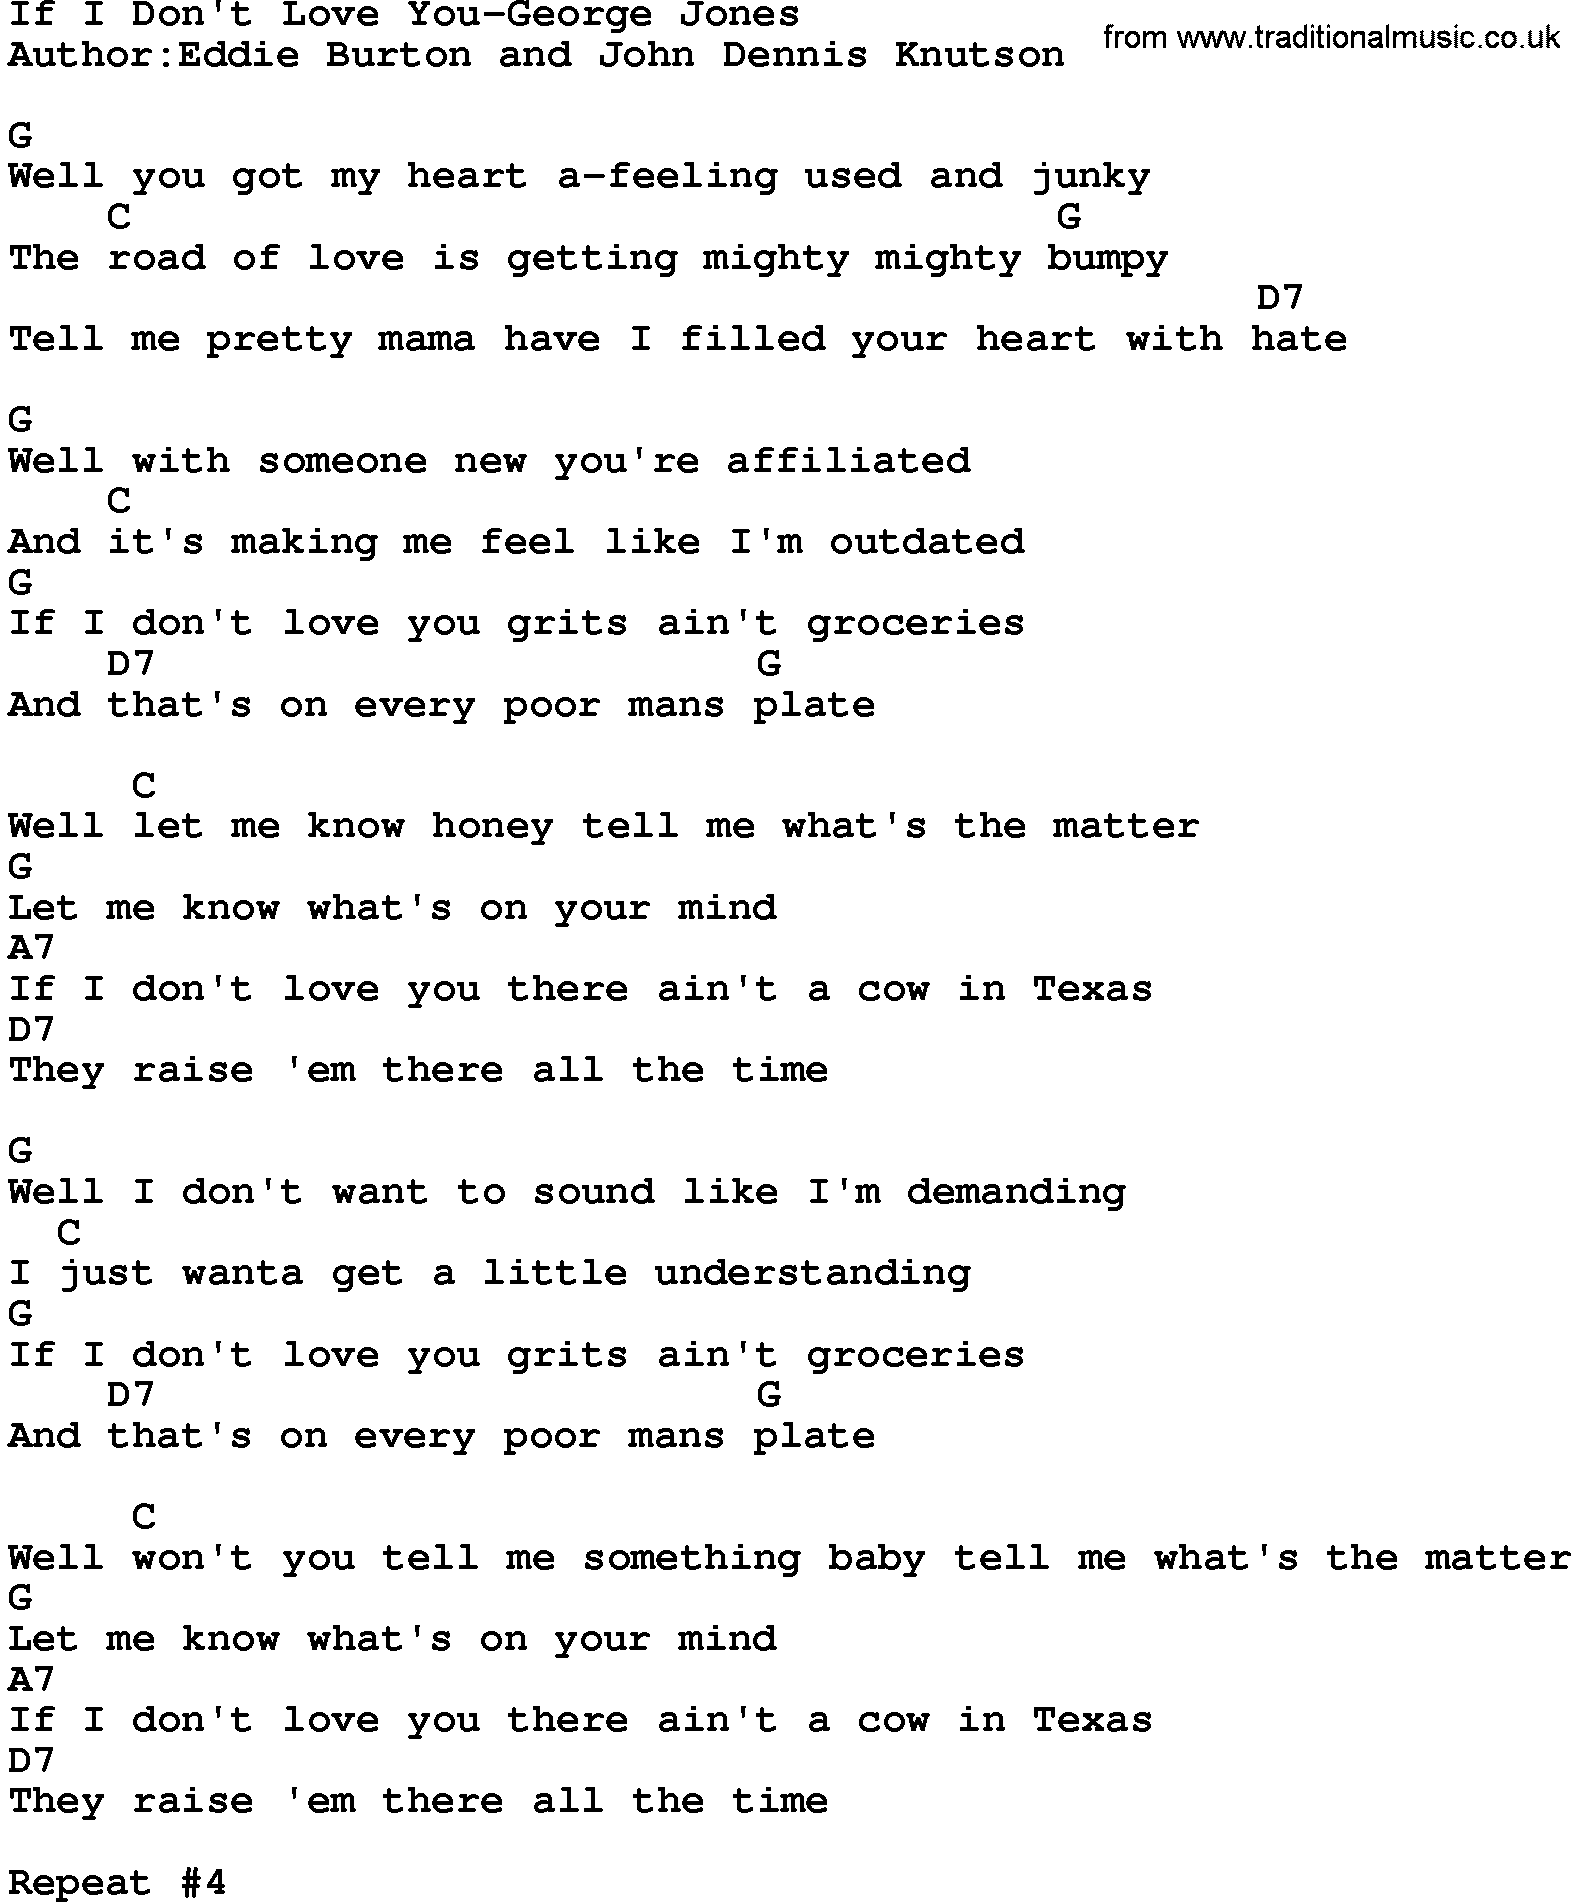 Country music song: If I Don't Love You-George Jones lyrics and chords